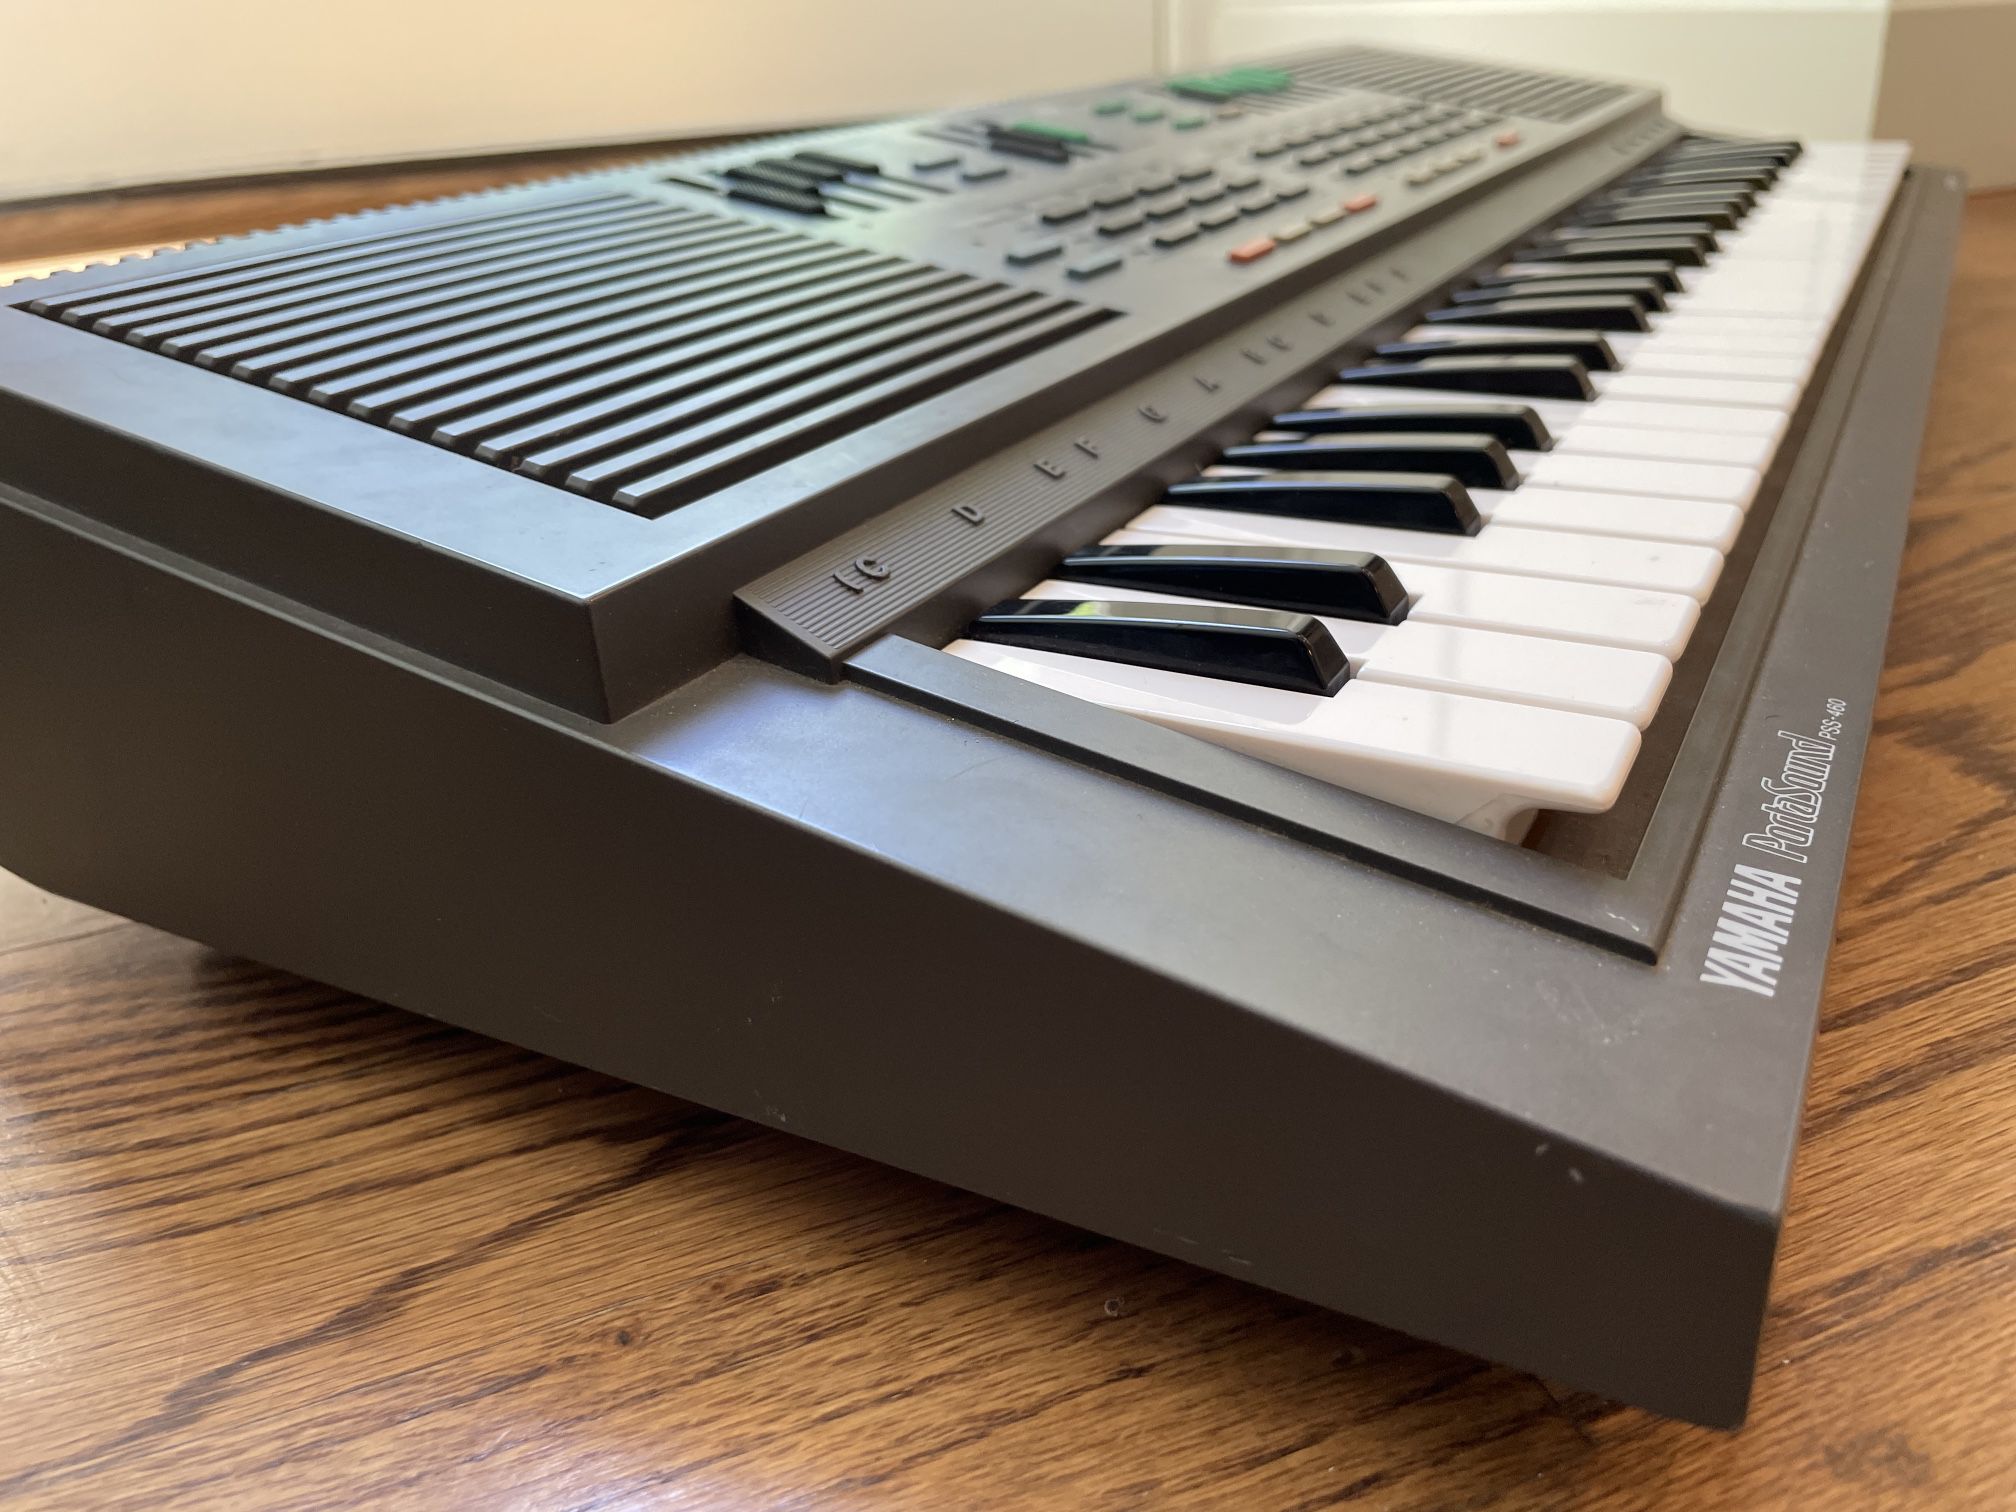 Yamaha PSS-460 49-VTG Key Synthesizer Keyboard w/ Power Cable- Tested And Works! Condition is pre owned and perhaps shows some signs of light cosmetic